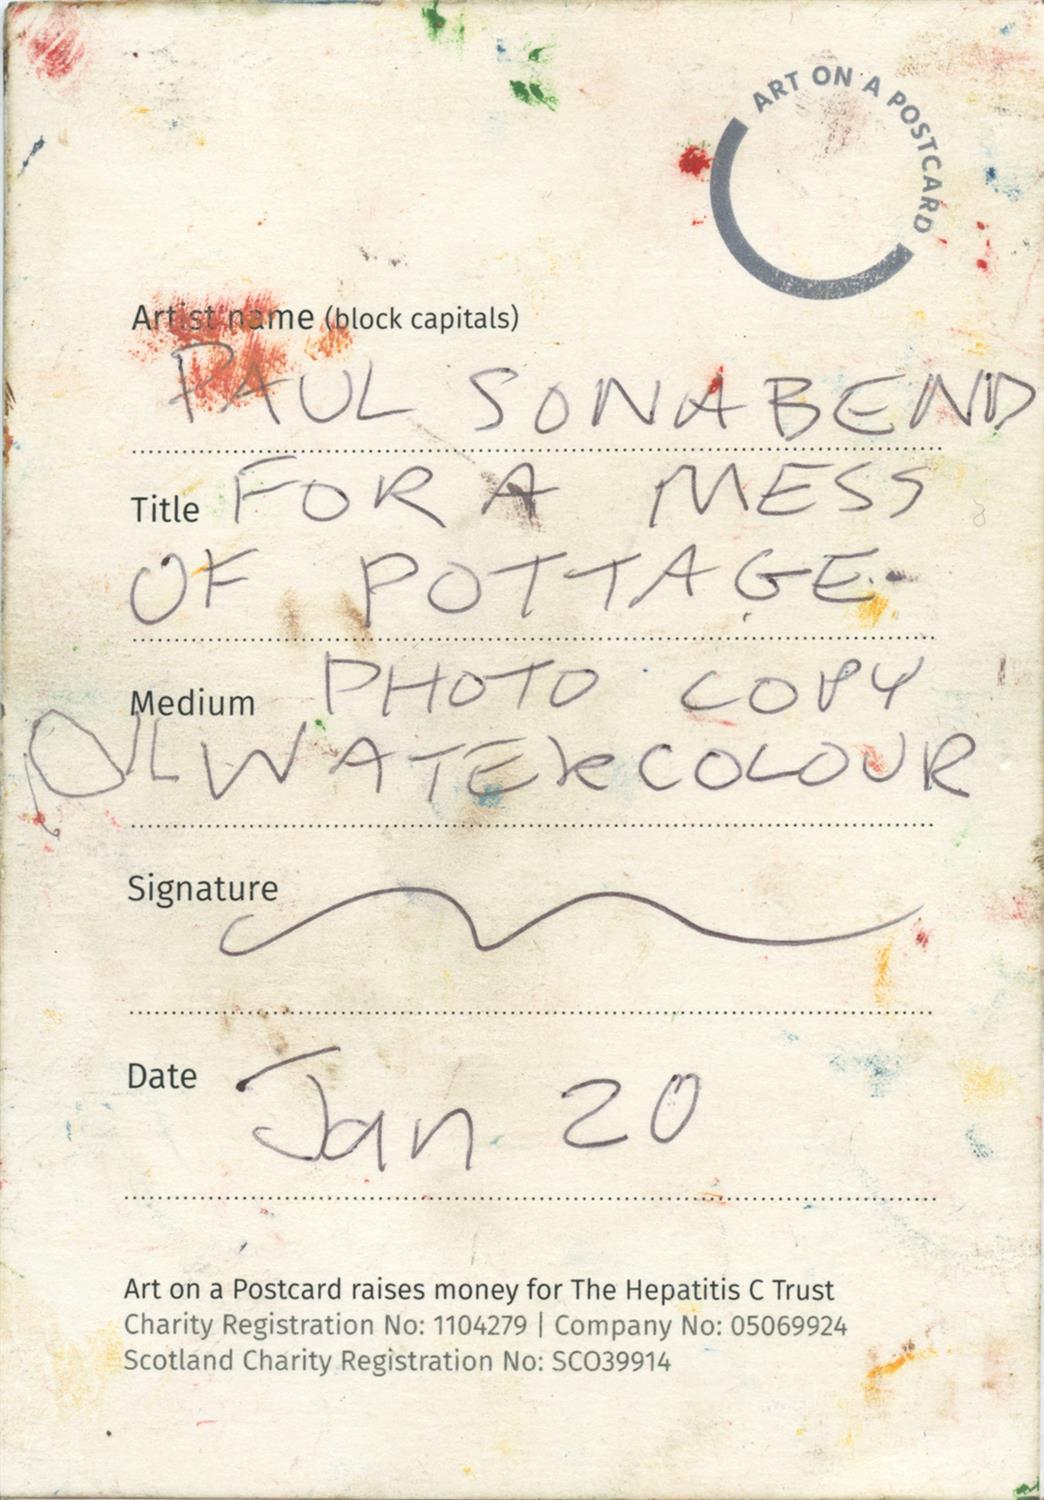 Paul Sonabend, For A Mess of Pottage, 2020 - Image 3 of 3